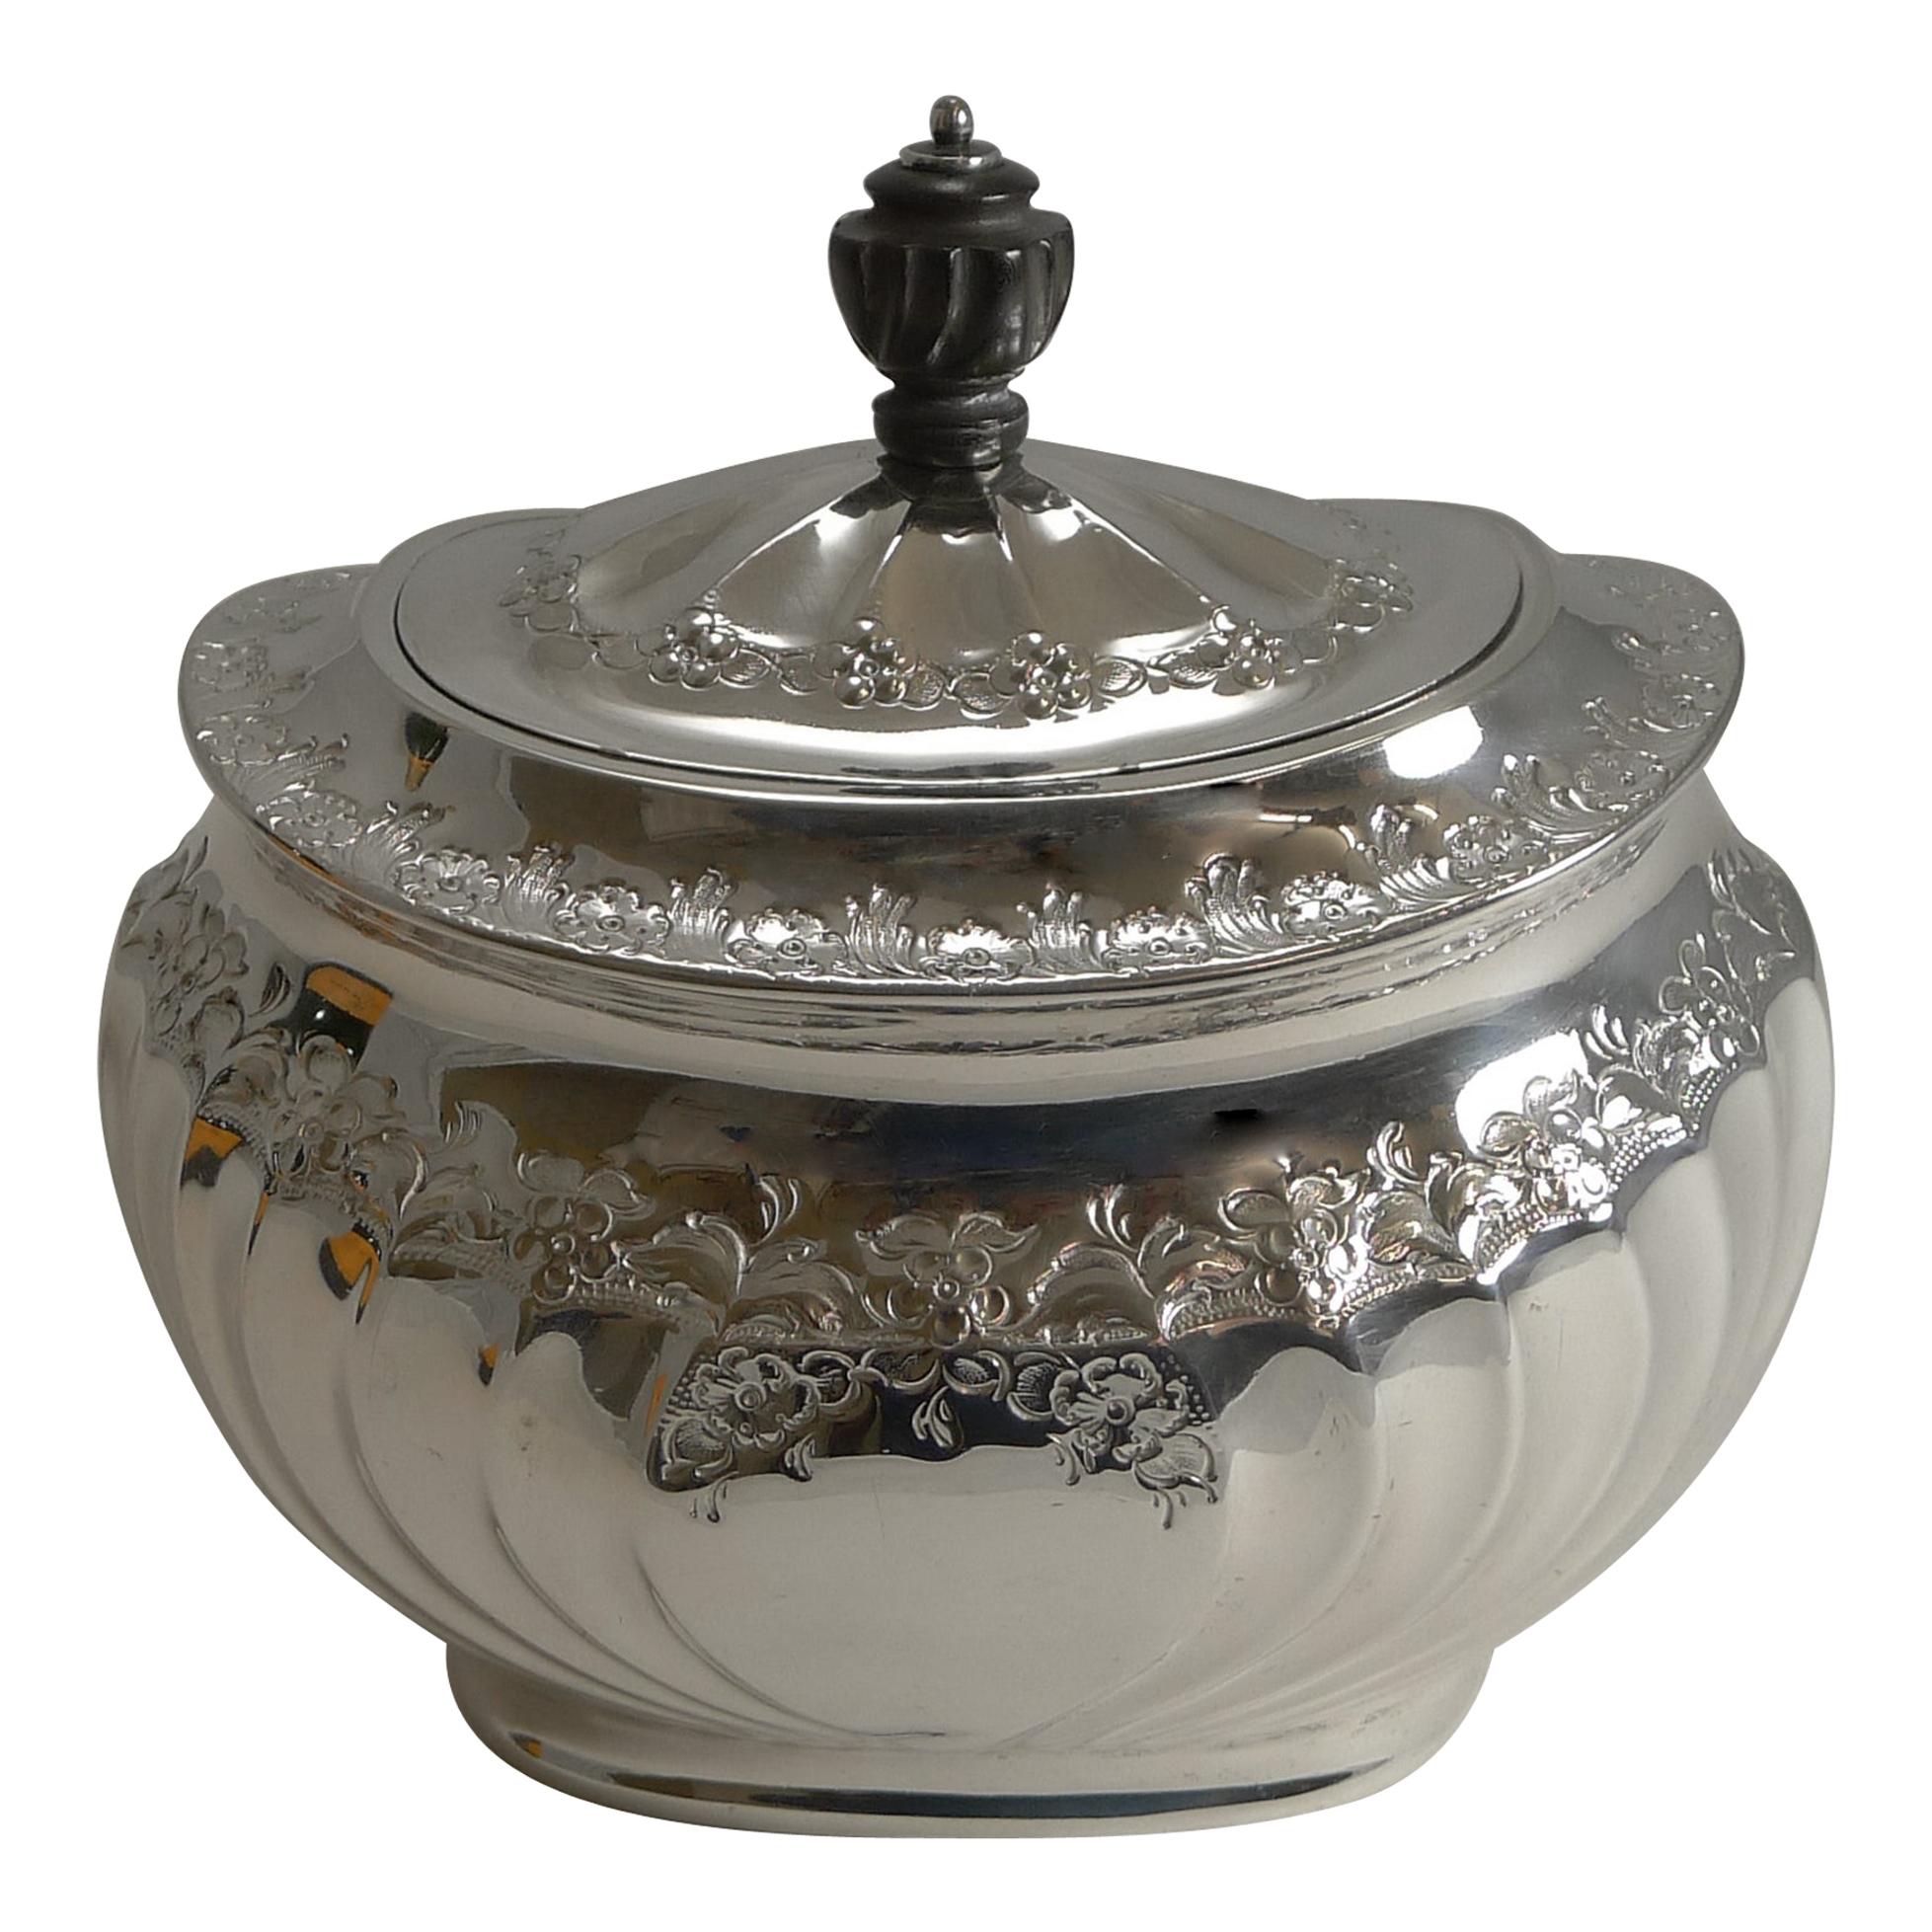 Grand English Silver Plated Tea Caddy by Atkin Brothers, Reg. 1889